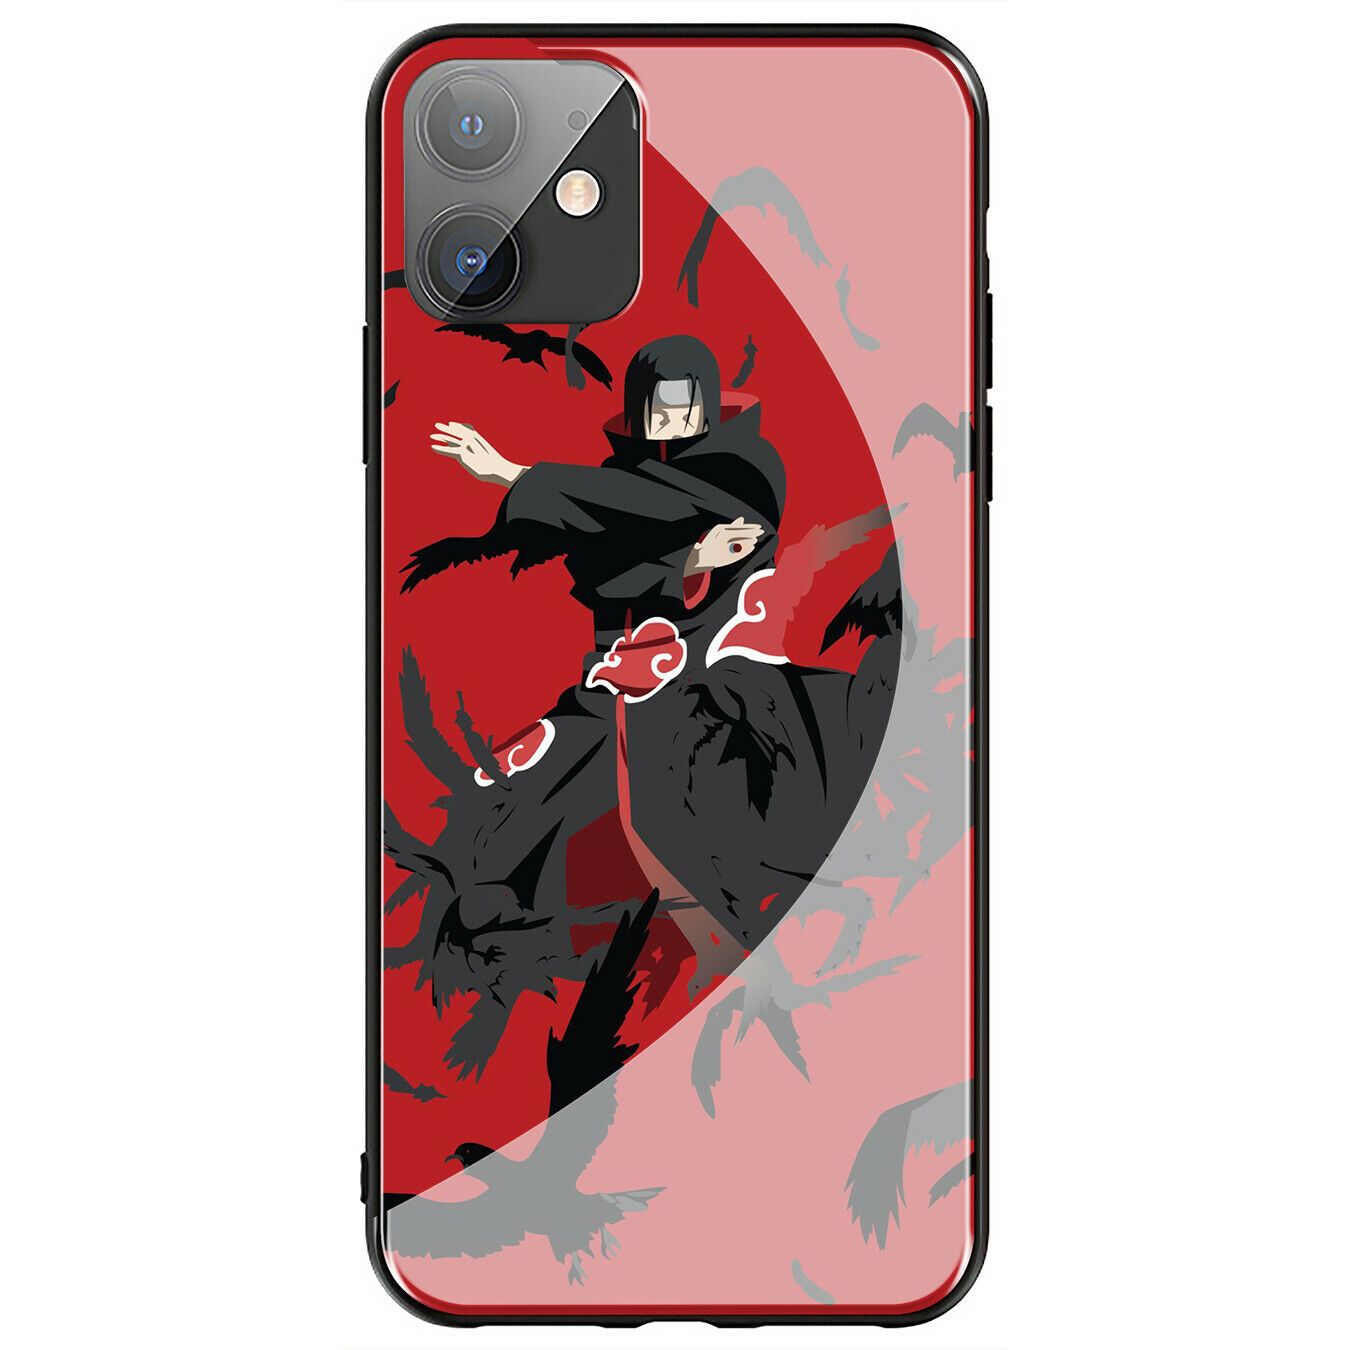 Sasuke NARUTO Akatsuki Glass Case for iPhone 11 Pro XR X XS Max 8 7 6 6s Plus + iPhone Cases AtlasCase 1 for iPhone 6/6S 